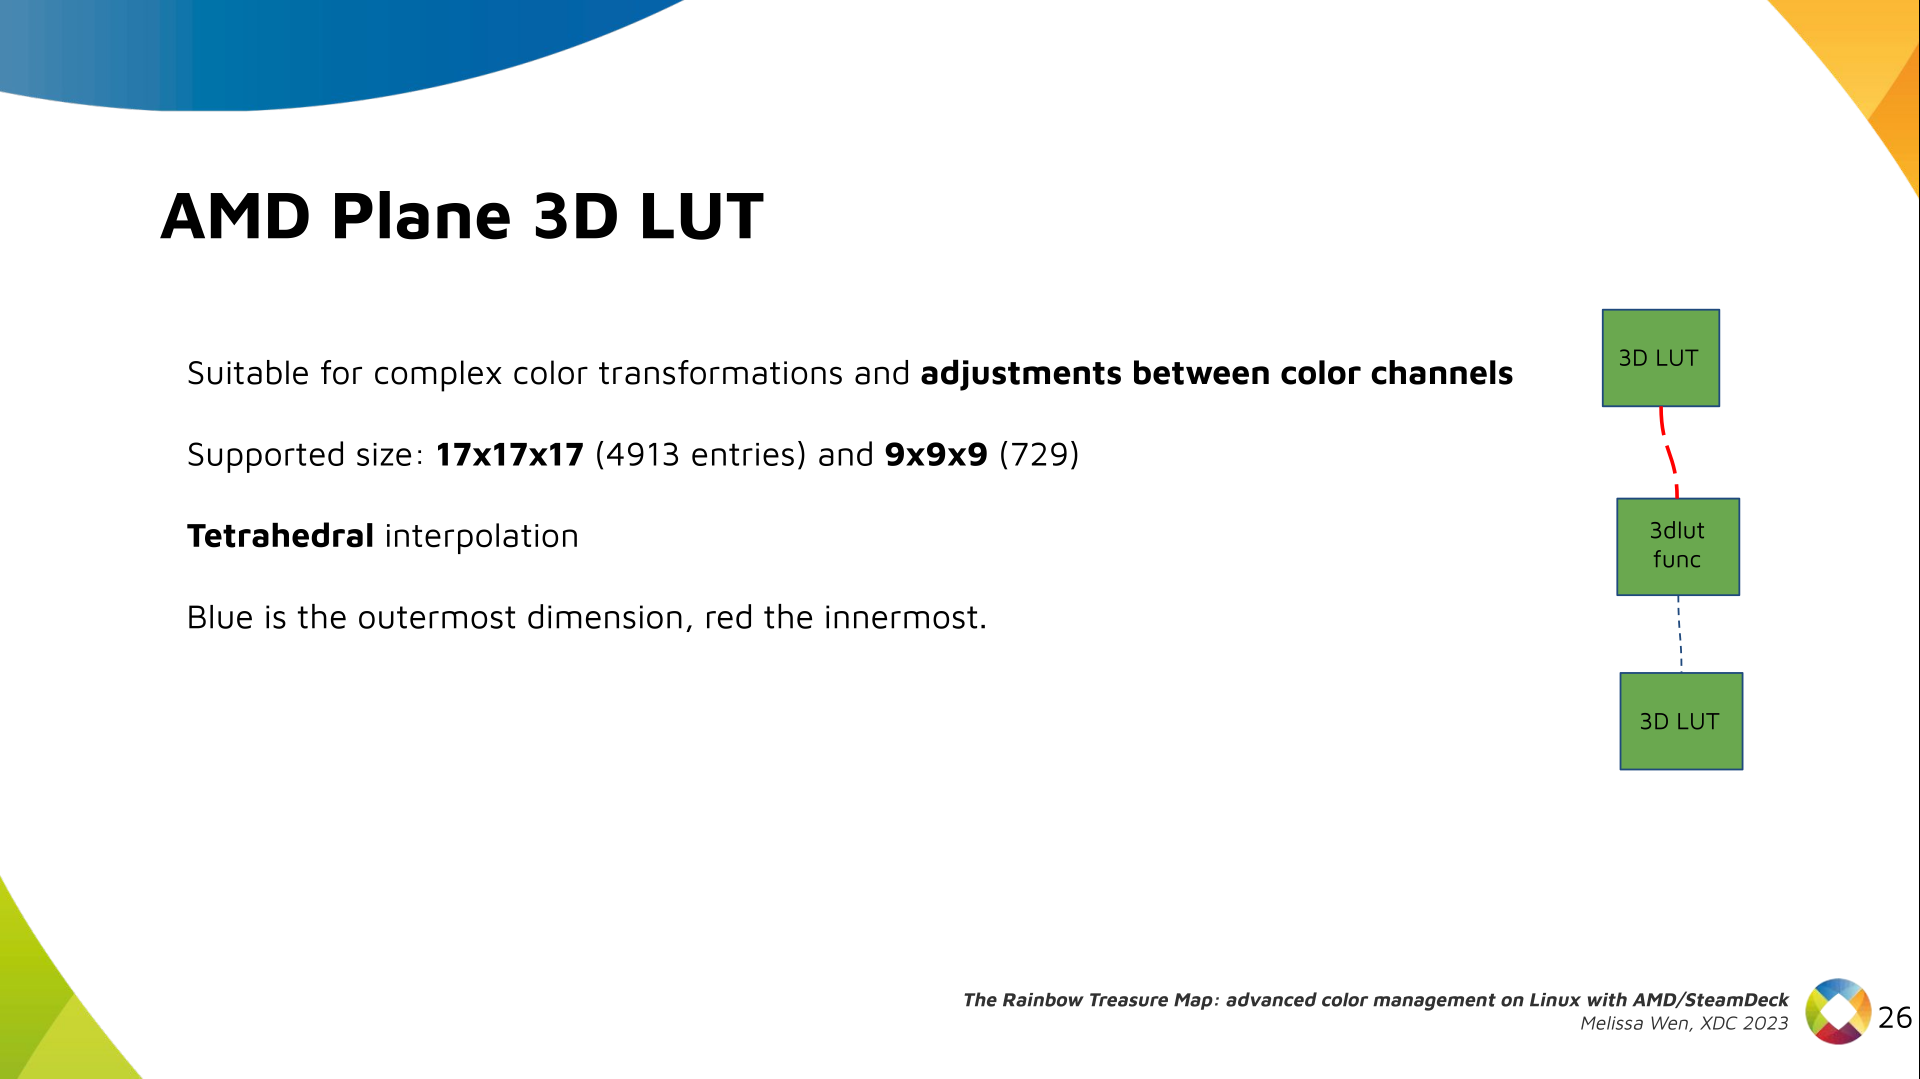 Slide 24: Describe plane 3D LUT property and hardware capabilities